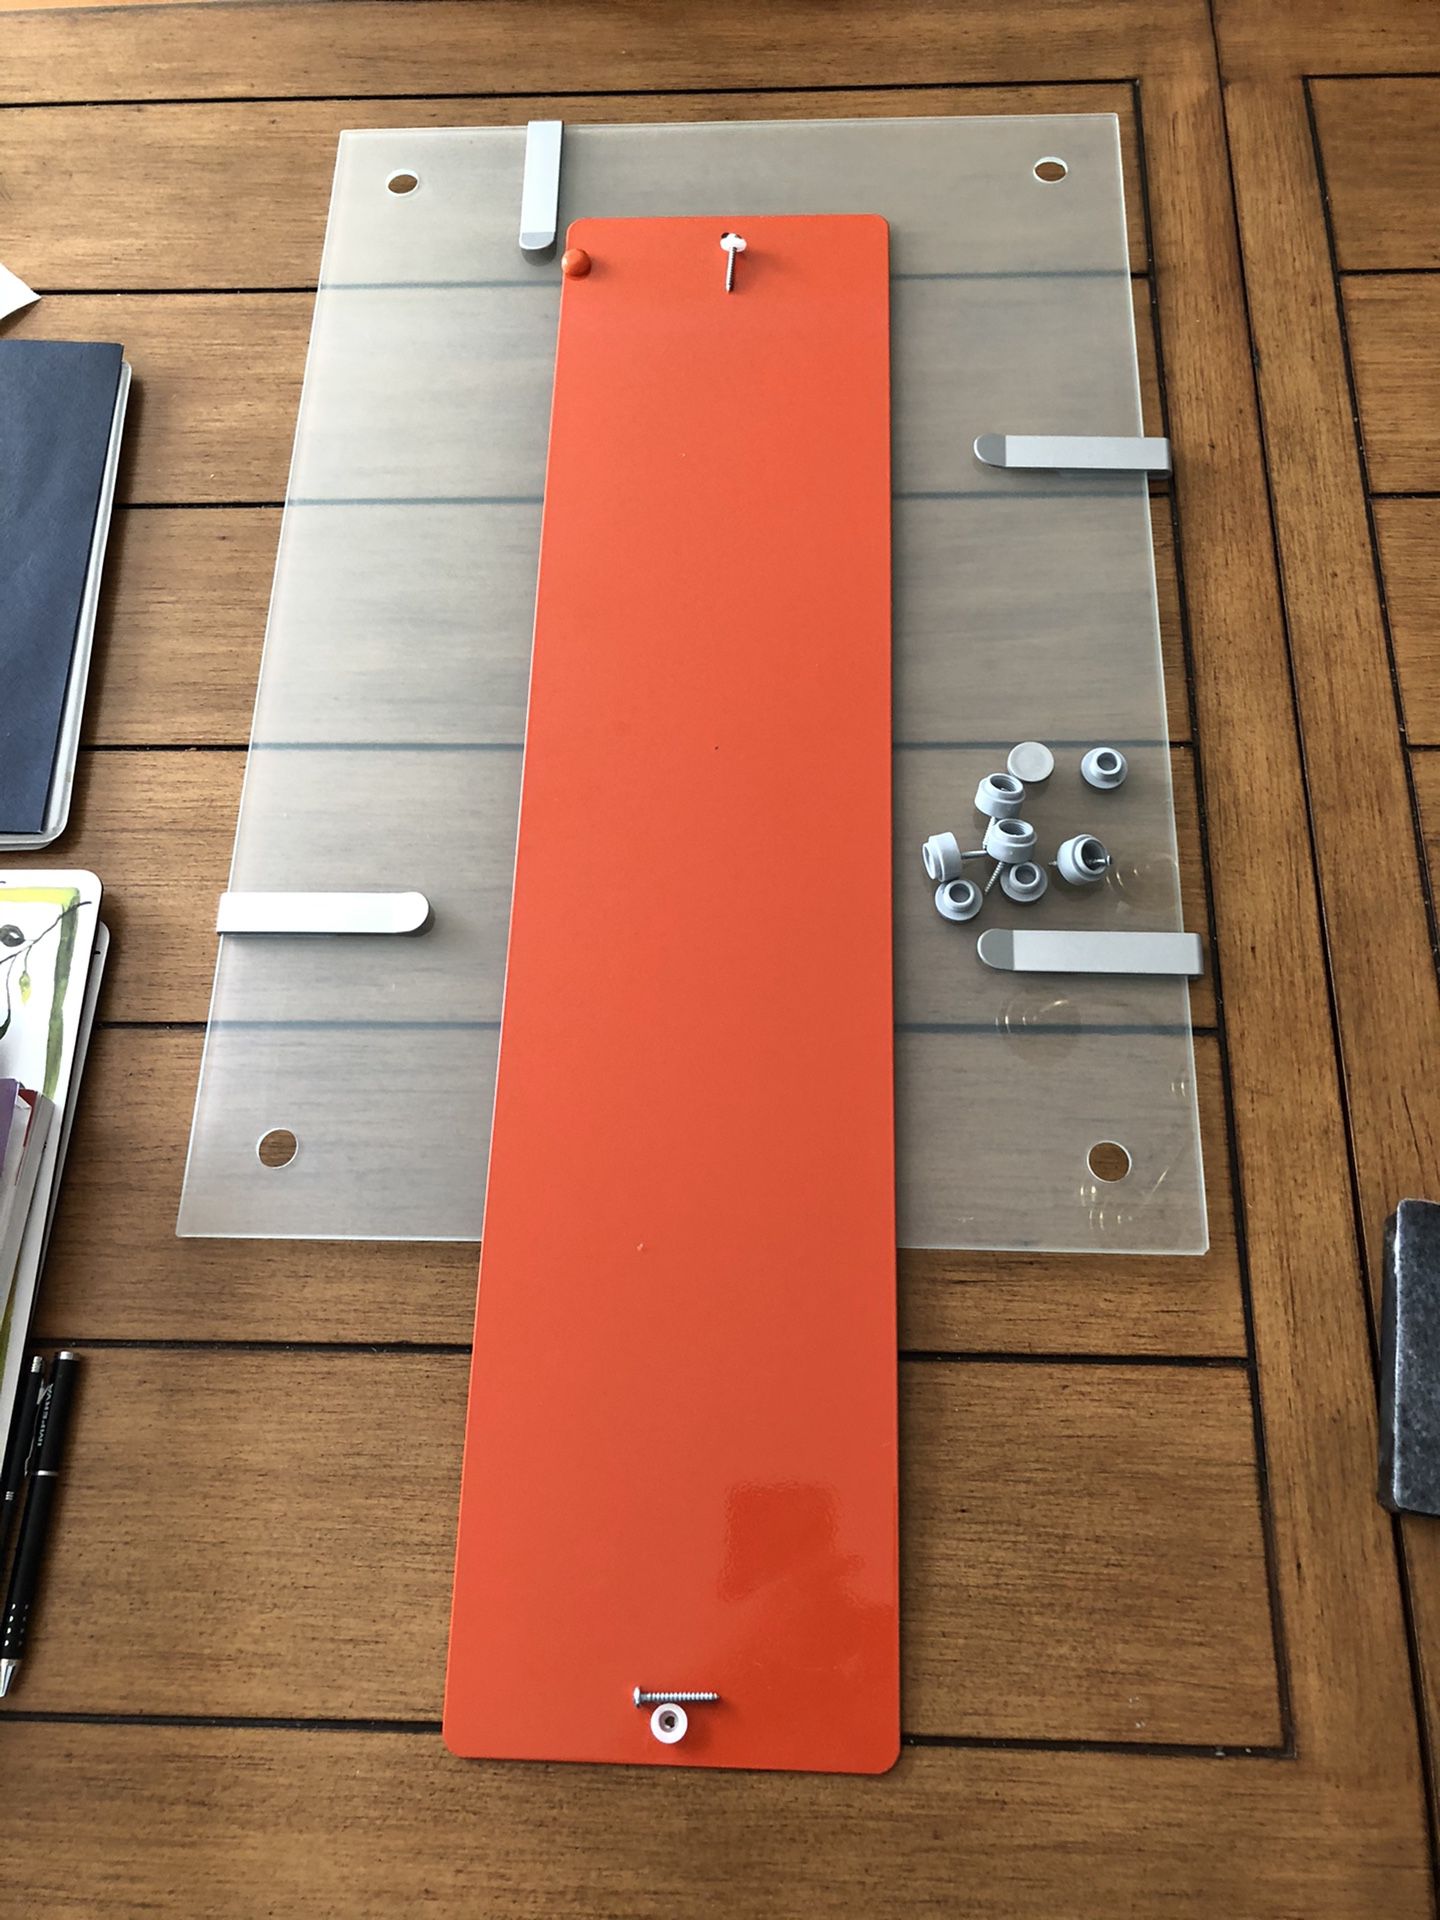 Magnetic board (orange) and glass message board